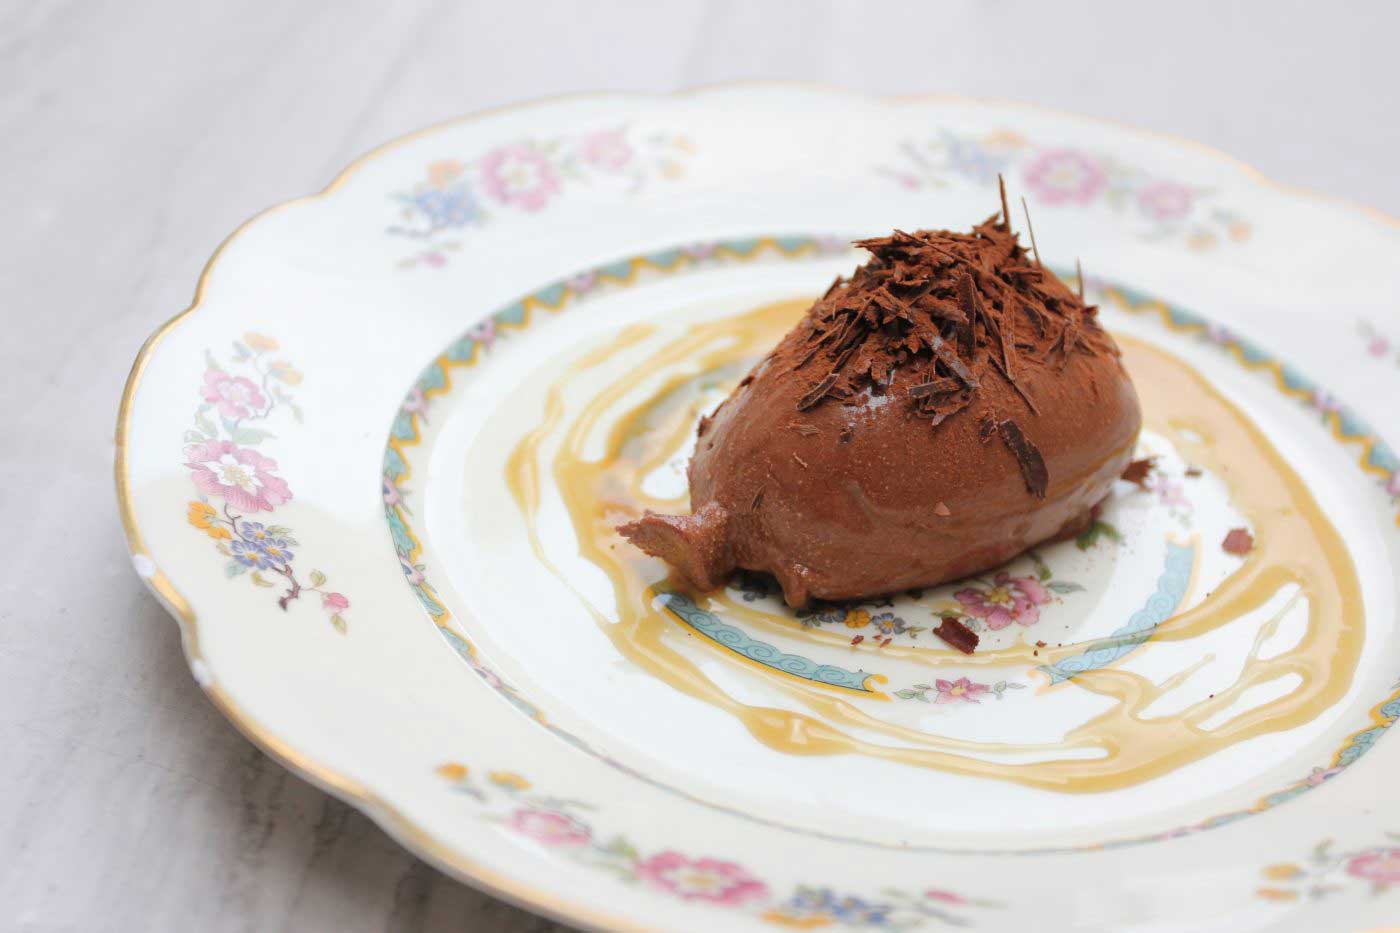 Chocolate Mousse with Salted Caramel Sauce